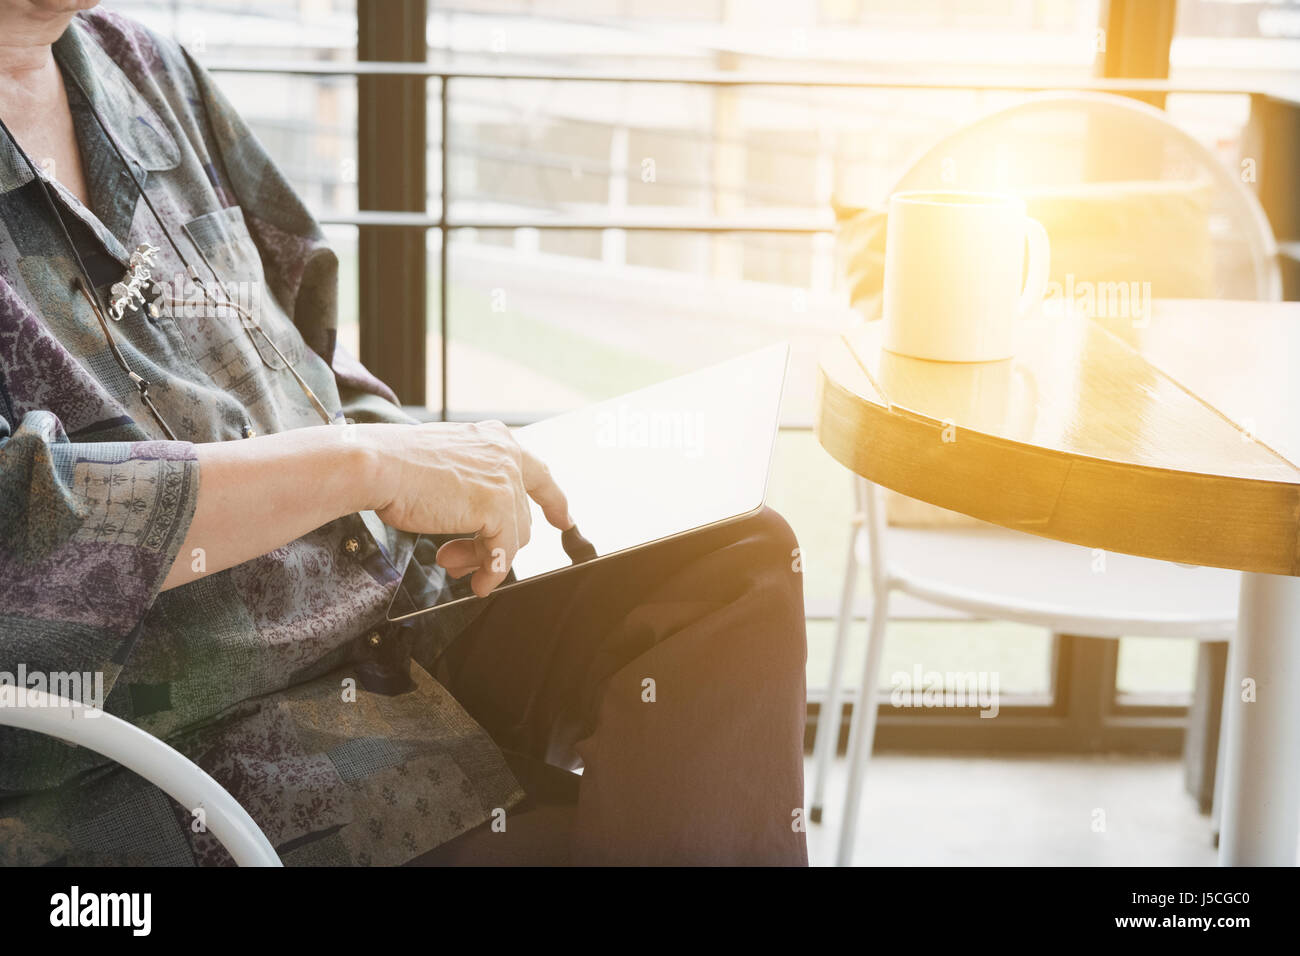 asian senior woman sitting and resting in cafe coffee shop near window using digital tablet computer. social networking concept Stock Photo